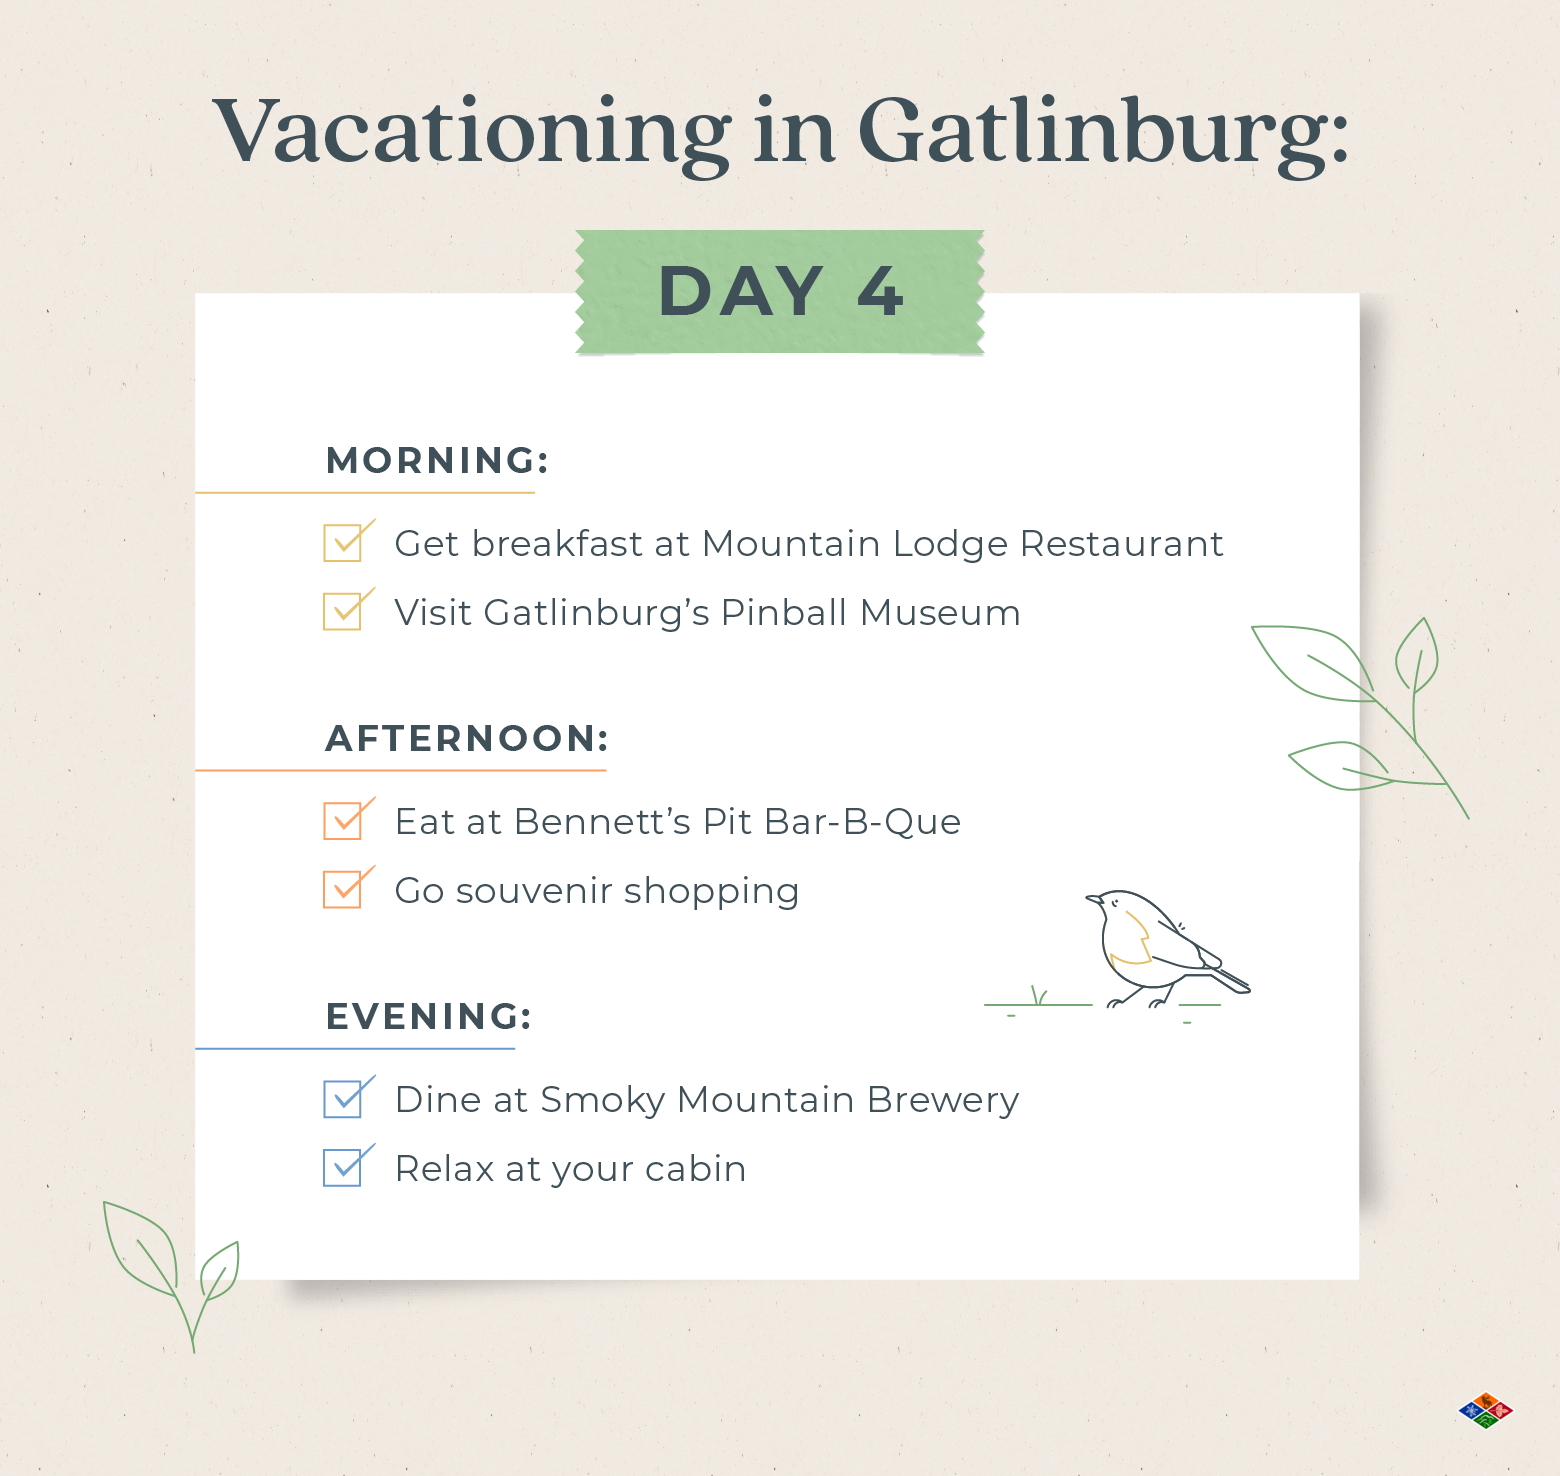  A graphic shows the day four itinerary for vacationing in Gatlinburg.